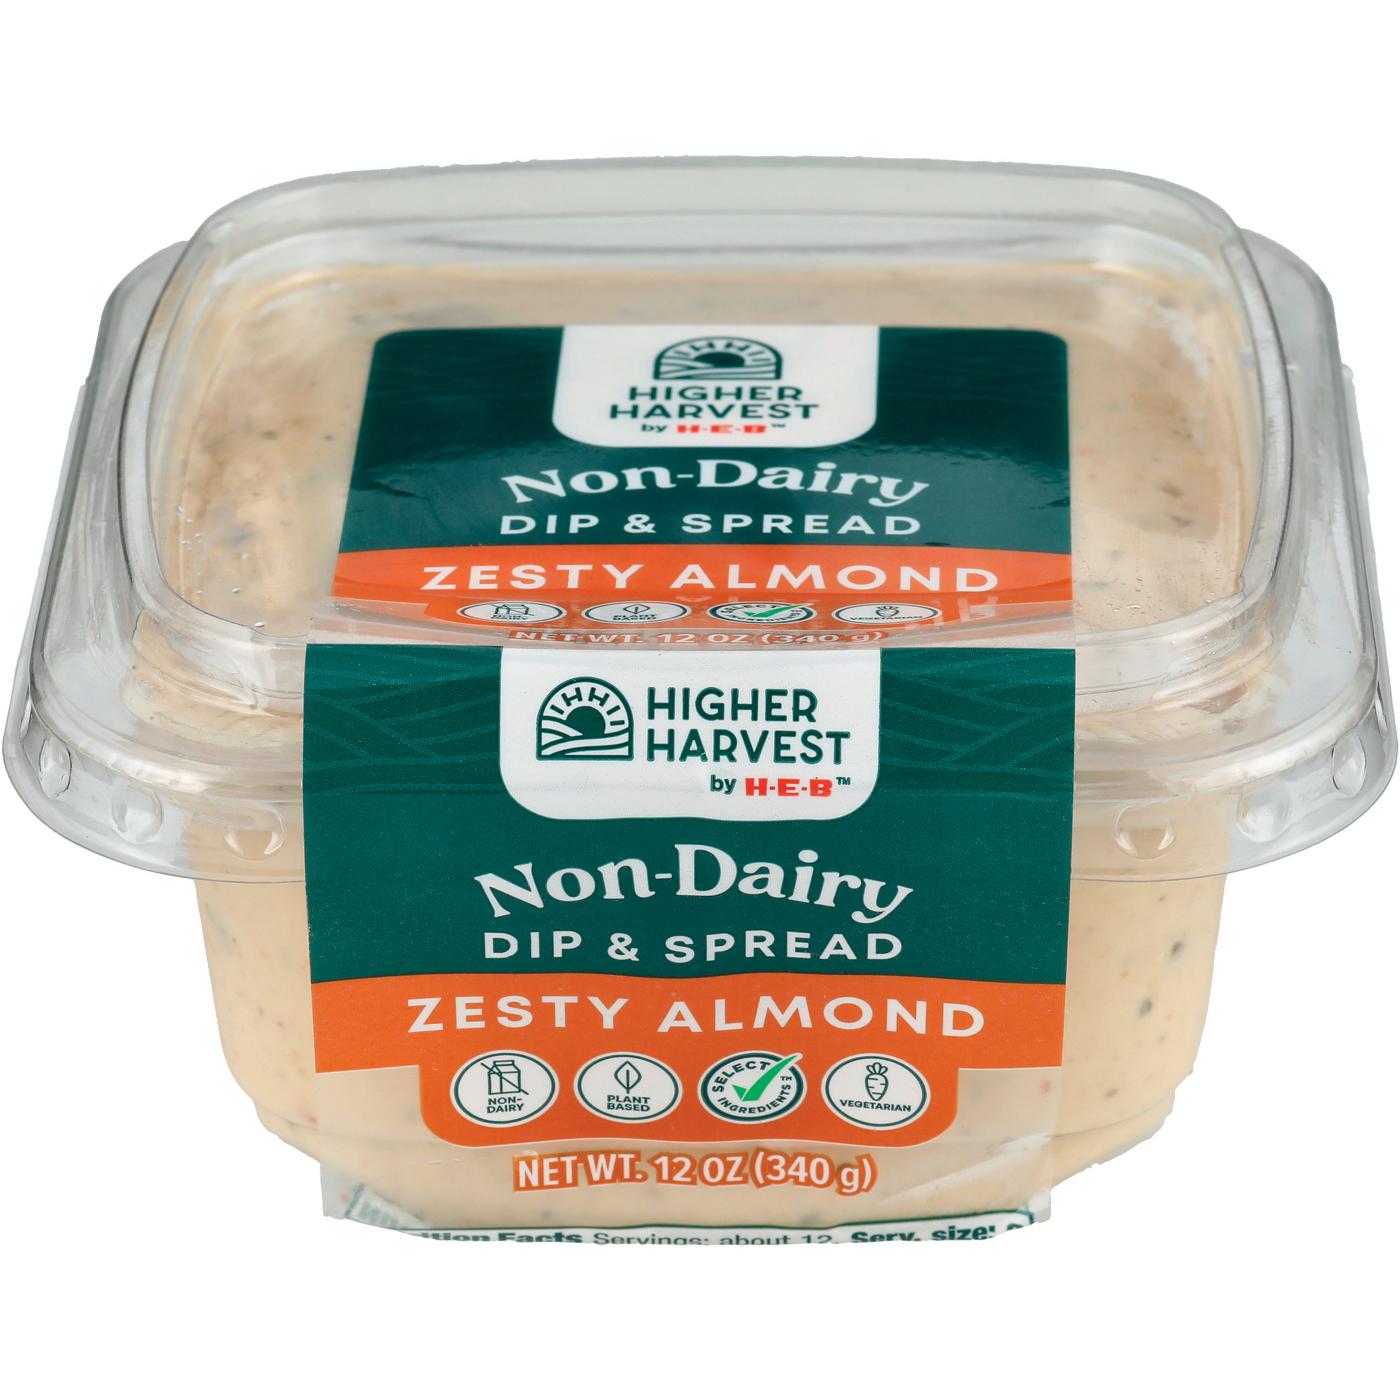 Higher Harvest by H-E-B Non-Dairy Dip & Spread - Zesty Almond; image 3 of 3